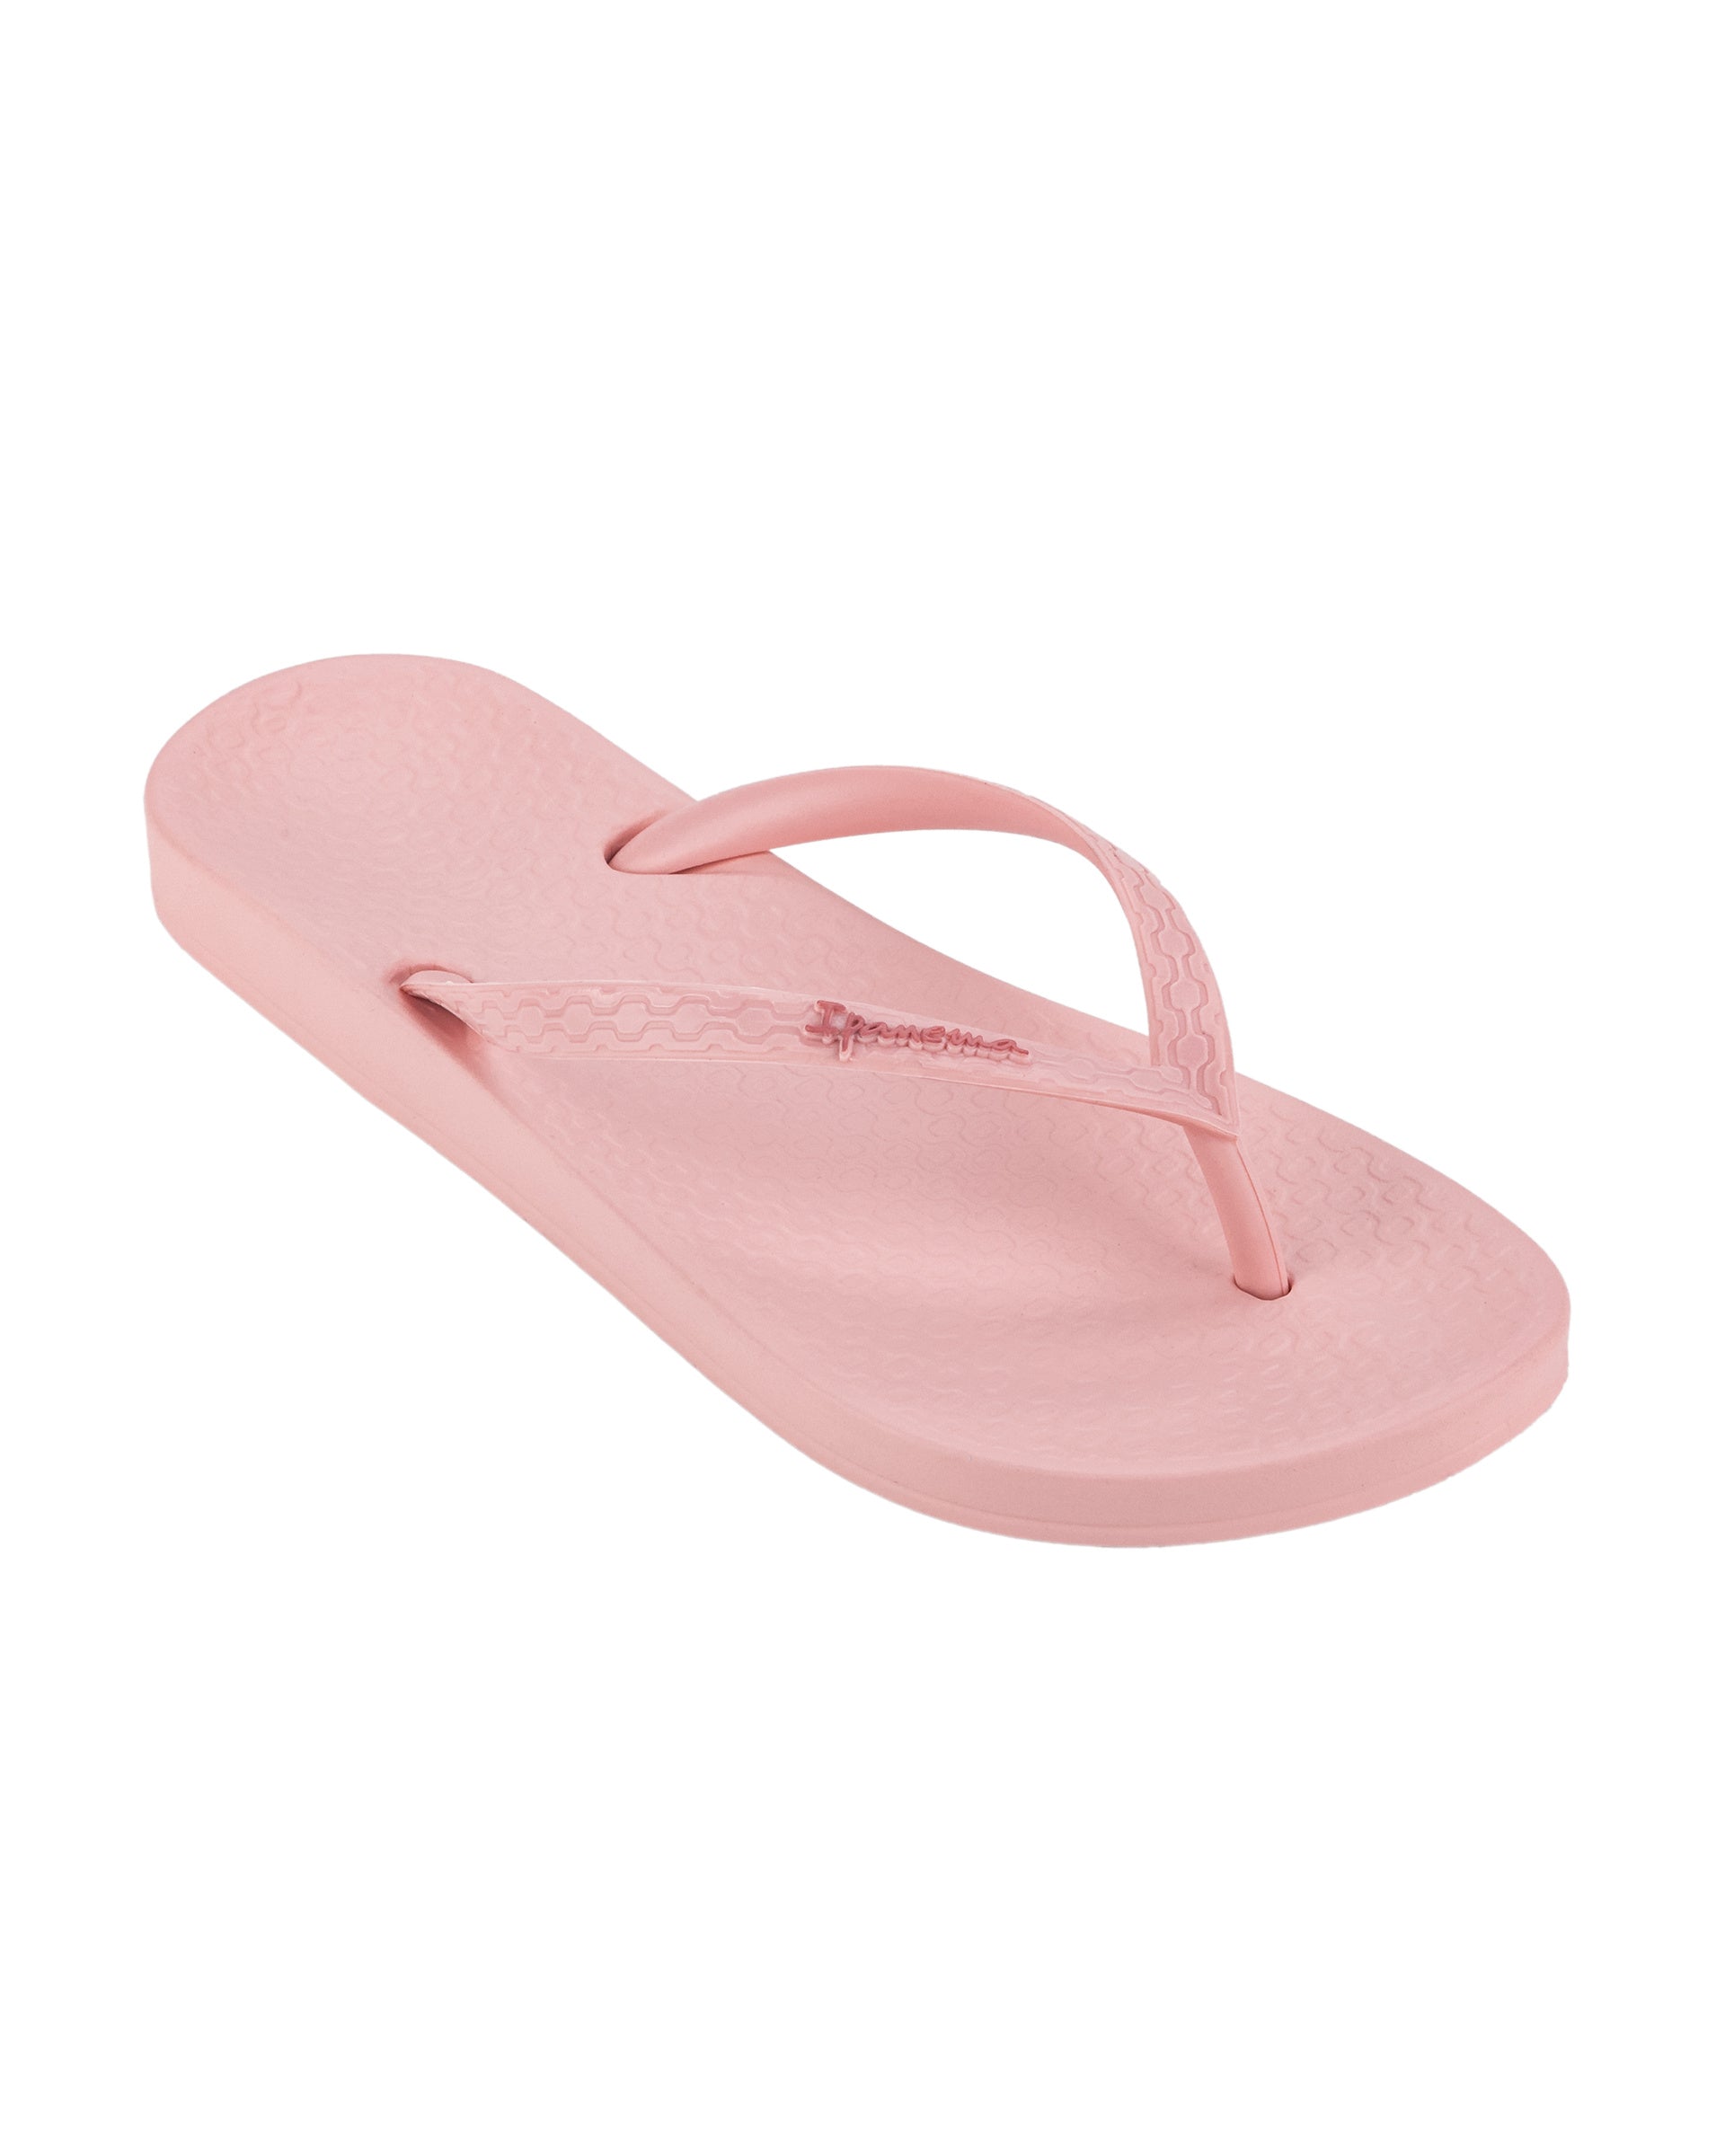 Angled view of a pink Ipanema Ana Colors women's flip flop.